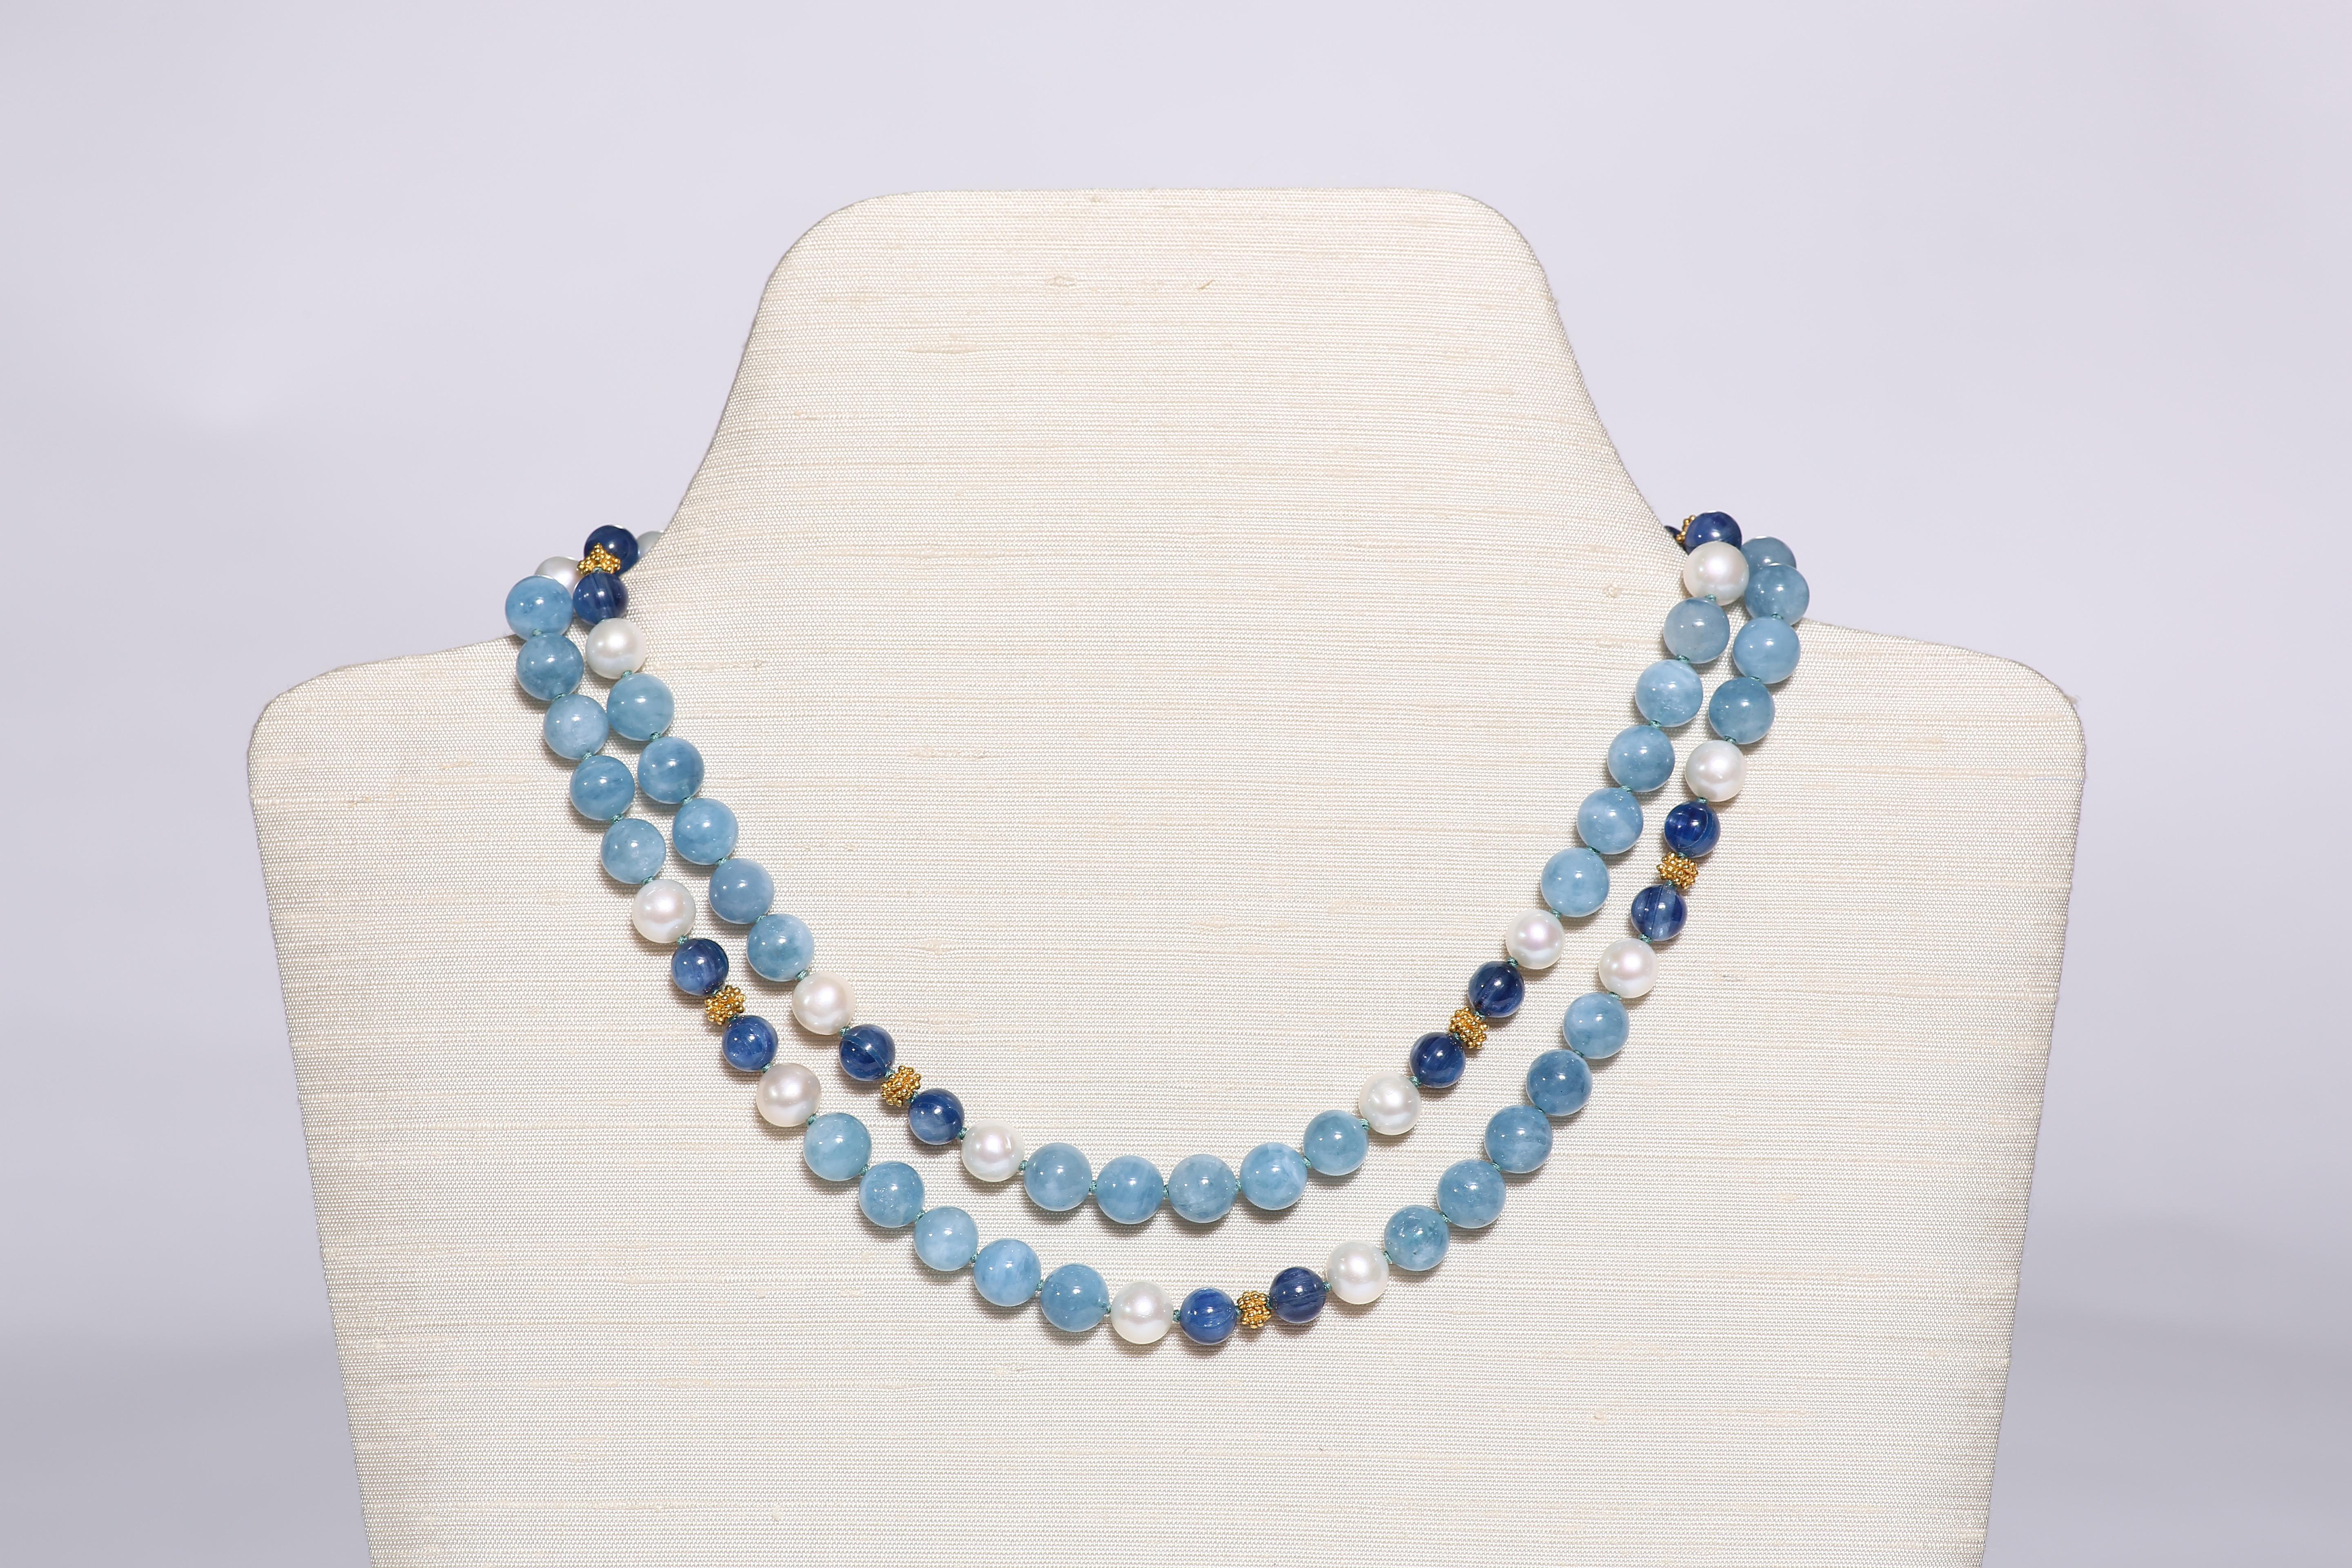 Contemporary Kyanite, Aquamarine, Freshwater Pearl and Gold Necklace